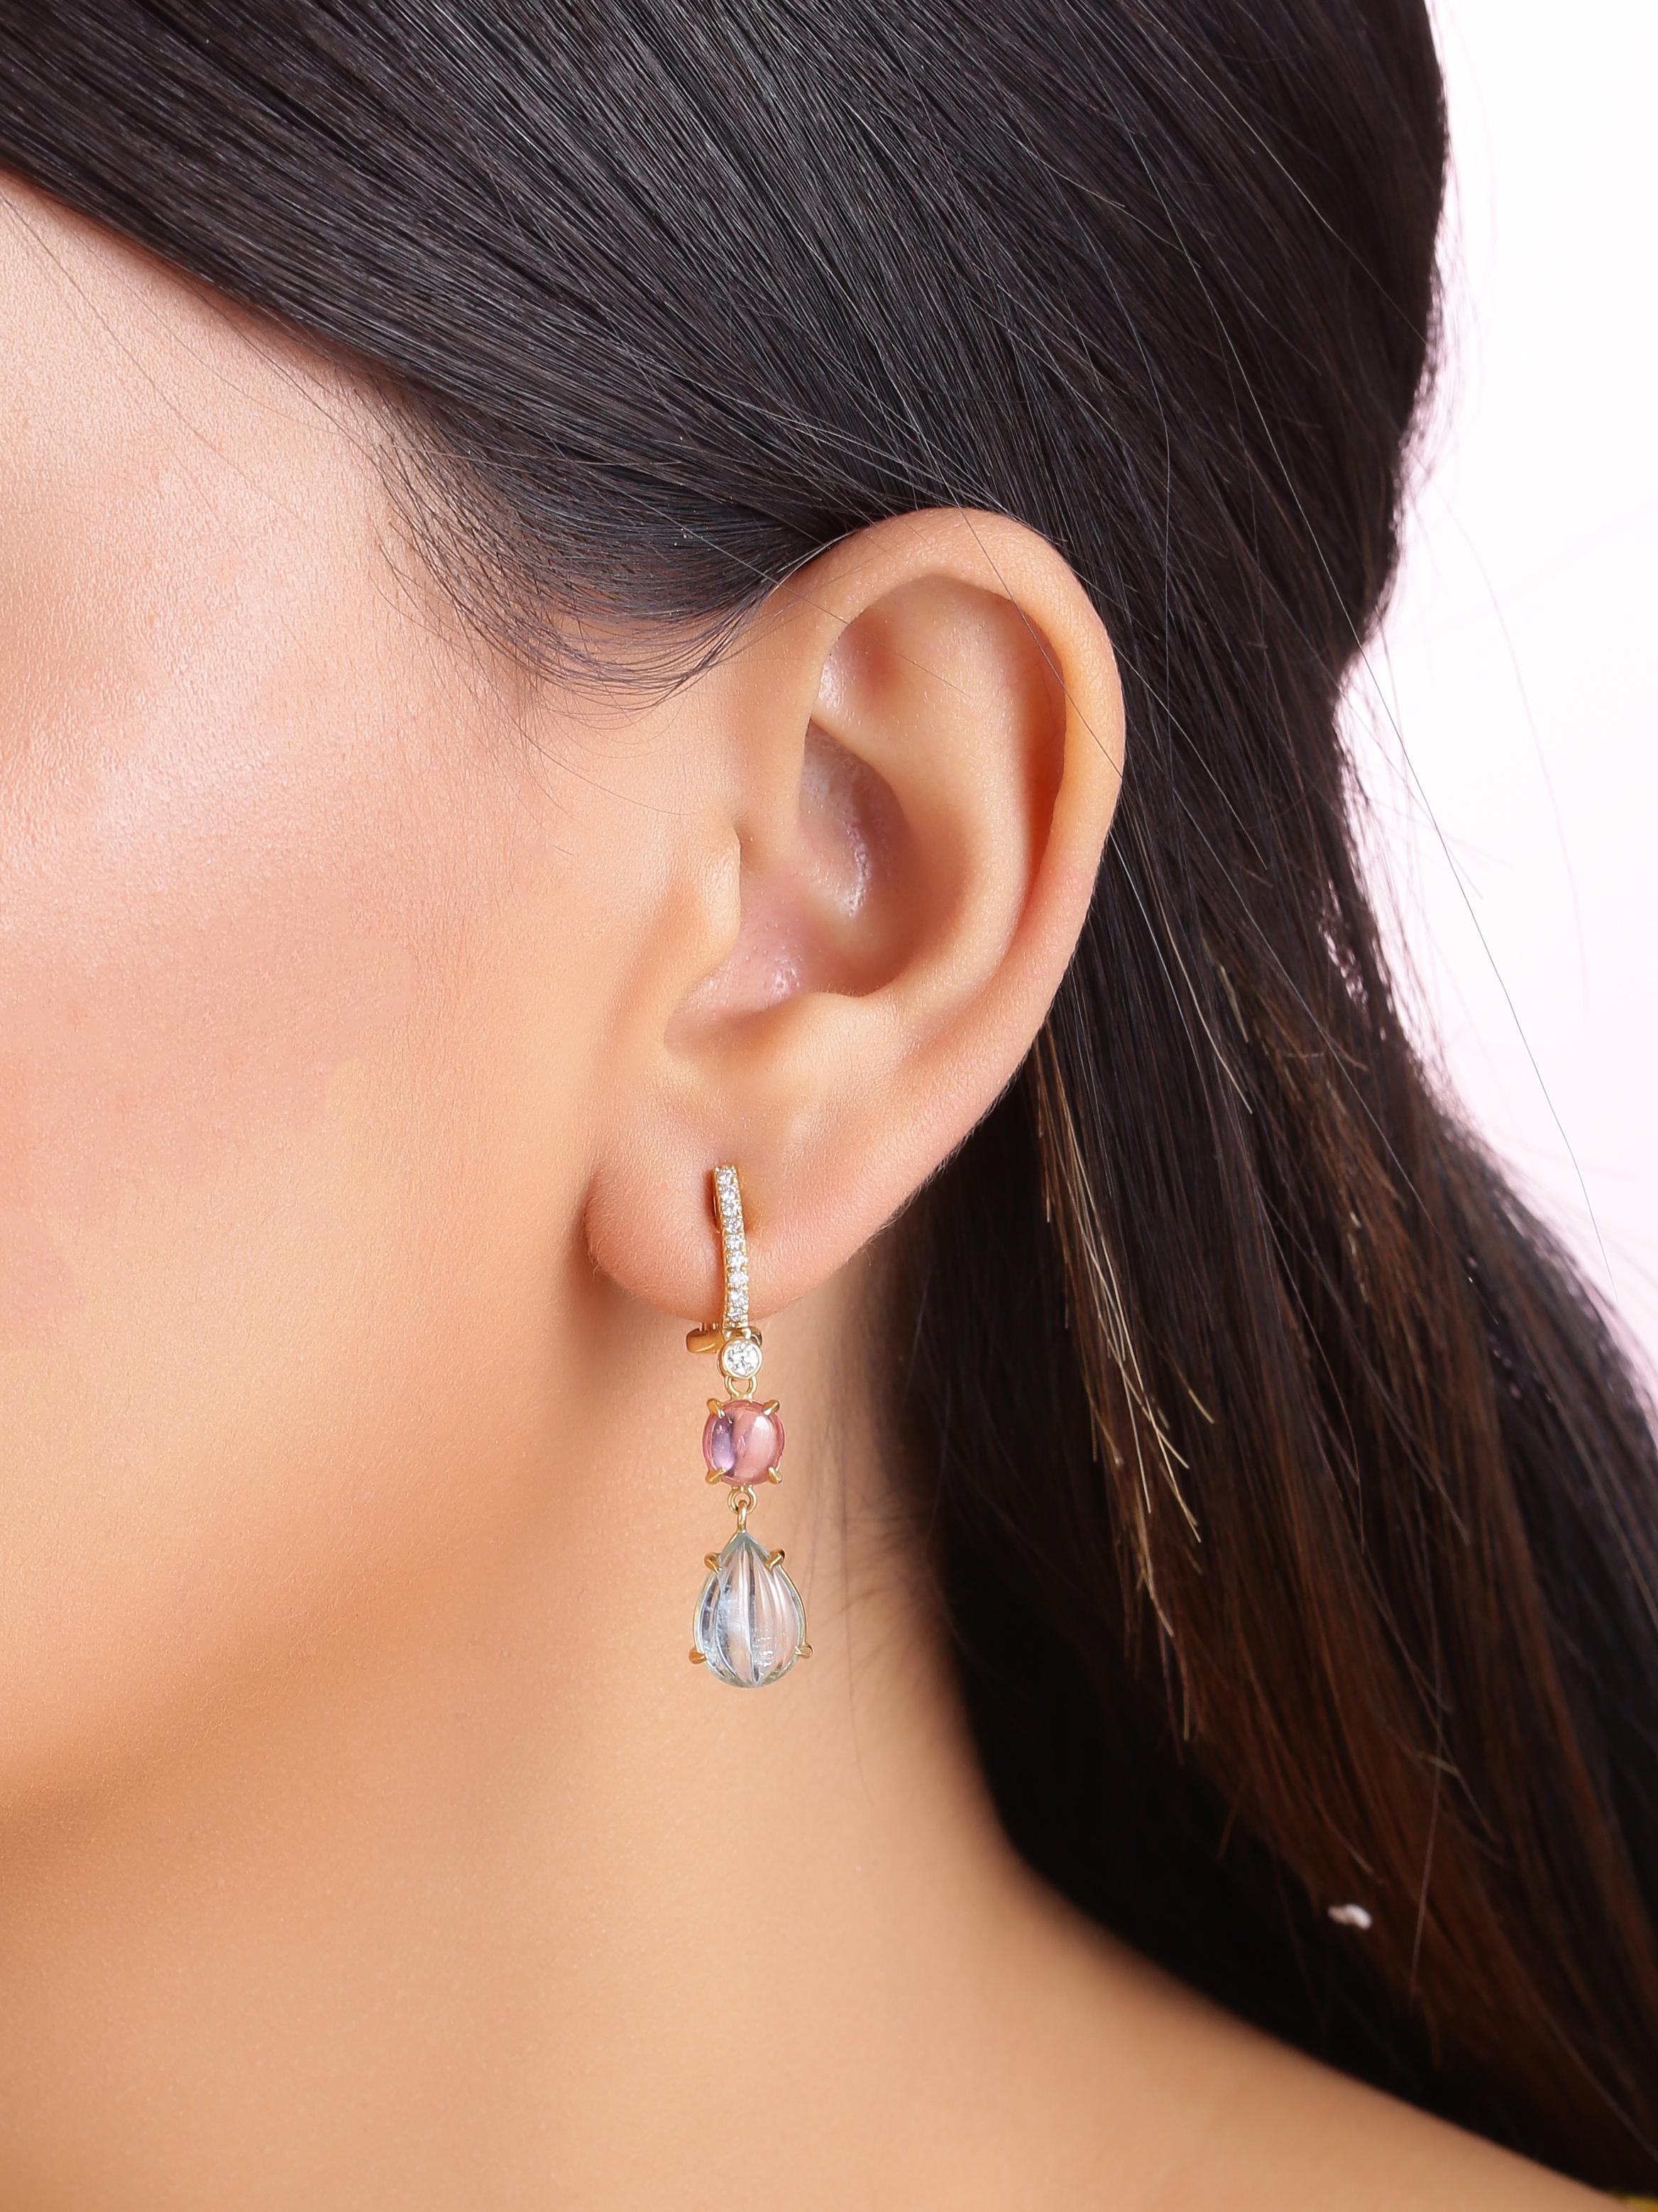 A pair of beautiful light weight dangle earrings with a diamond hoop on top then a pair of Natural Pink Spinel Cabochon followed by a pair of fine hand carved Aquamarines. 
The piece is made in 18K yellow gold.

The aquamarines in the earrings weigh